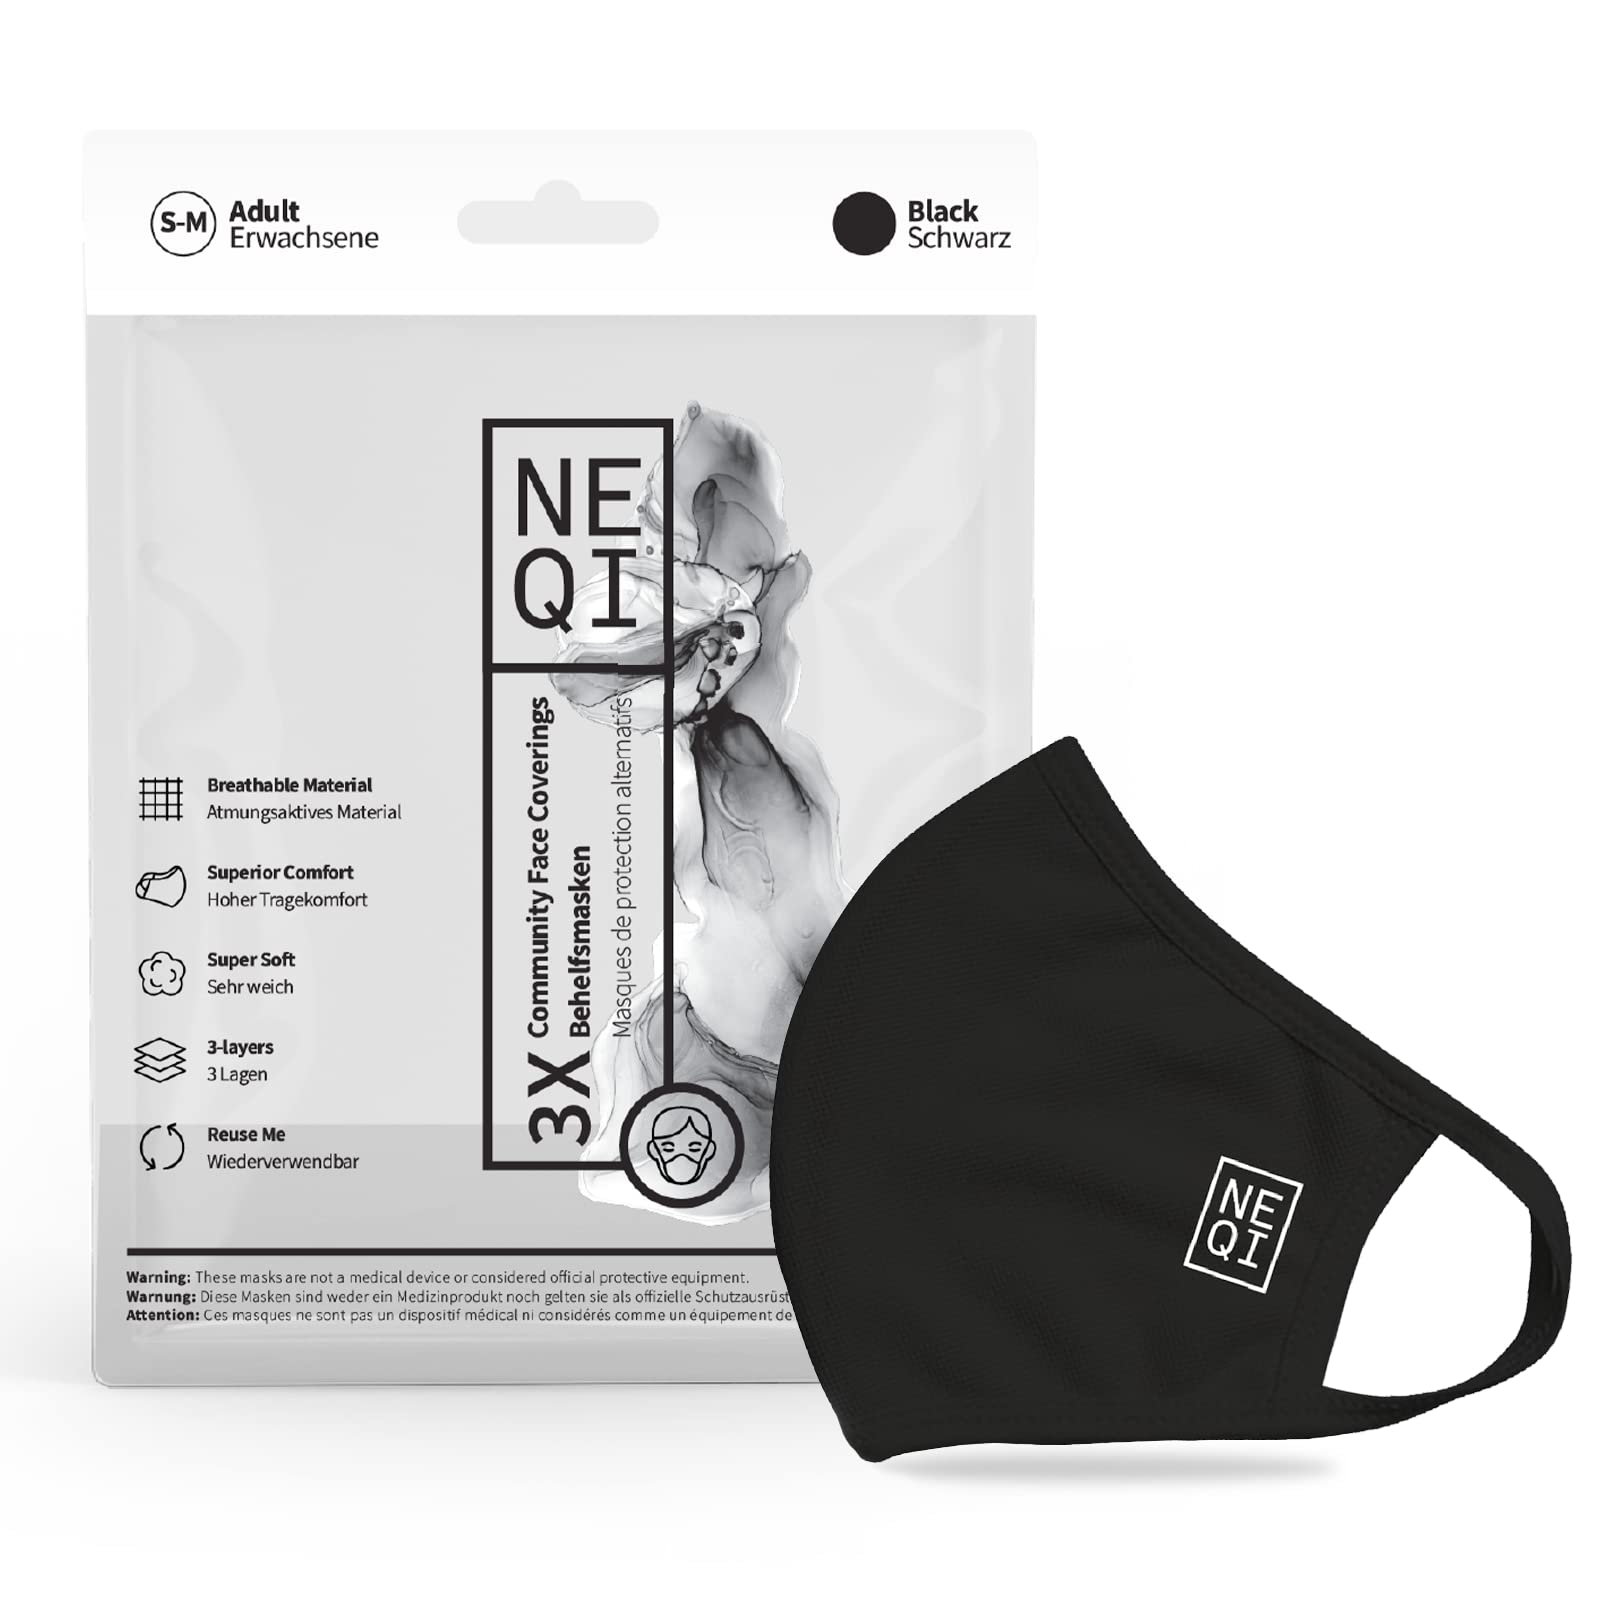 Black NEQI Face Mask reusable - 3x Unisex Face Mask with 3 layer protection, filtering 80% of particles I Lightweight & Comfortable Face Covering